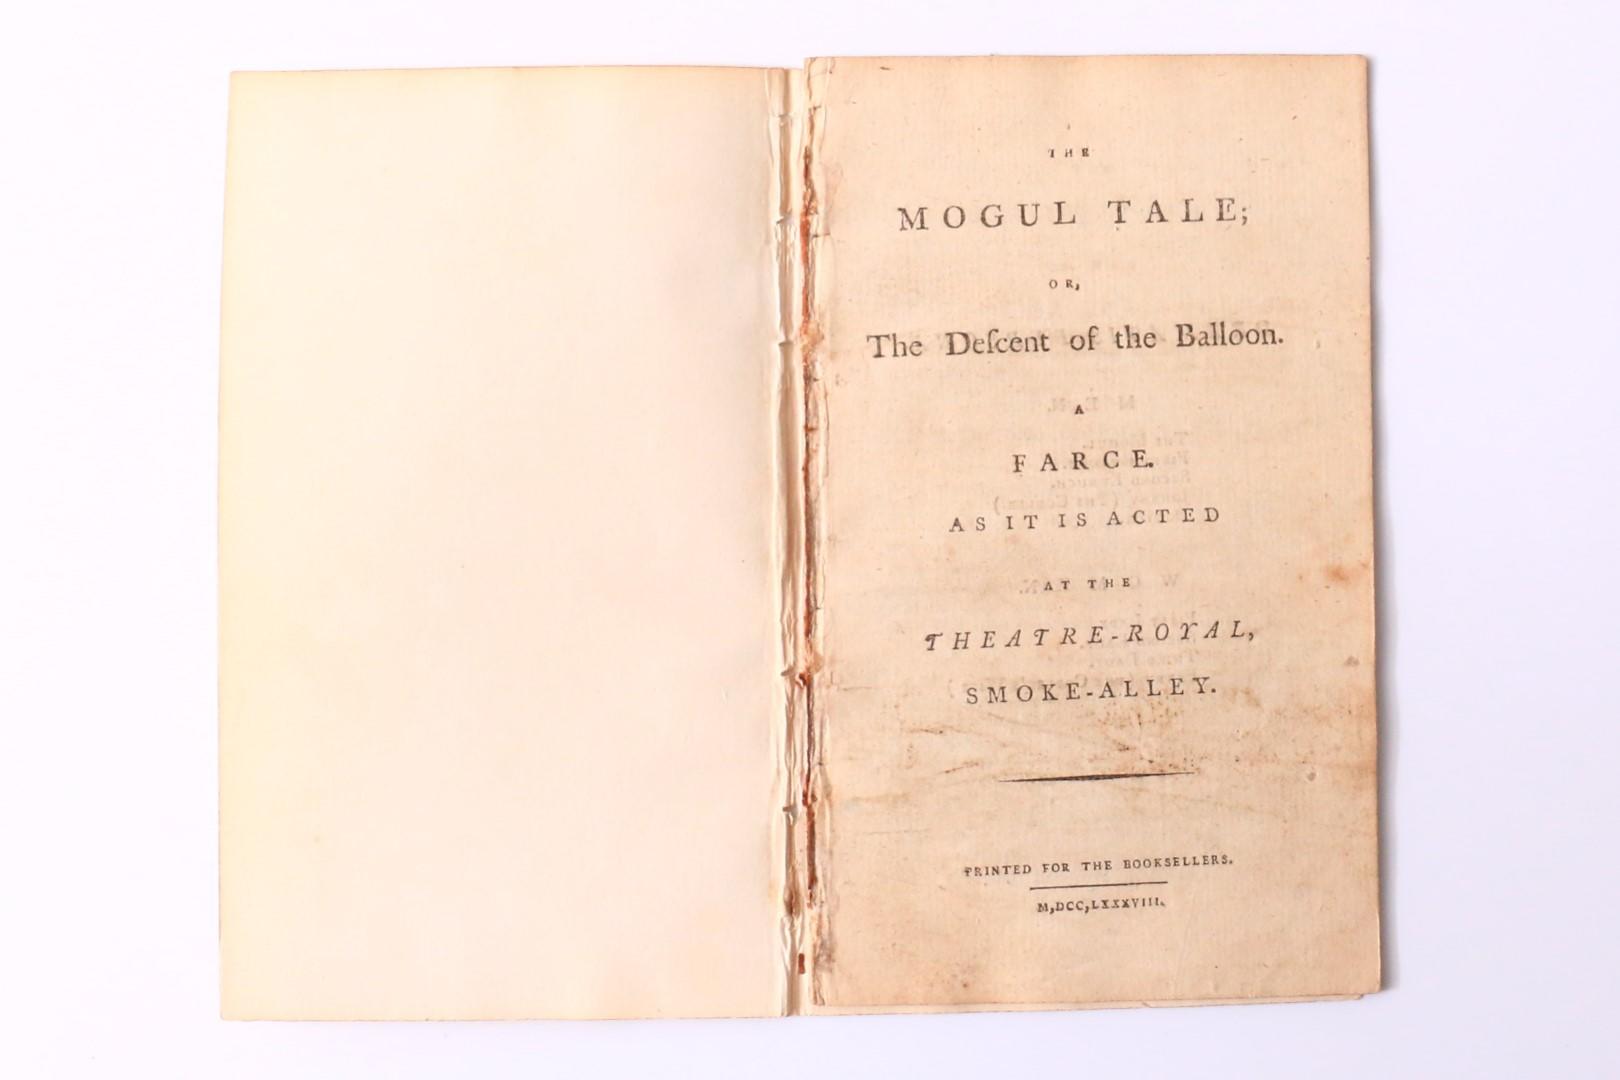 Anonymous [Elizabeth Inchbald] - The Mogul Tale; or, The Descent of the Balloon. A Farce as it is Acted at the Theatre-Royal, Smoke-Alley - No Publisher, 1788, First Edition.